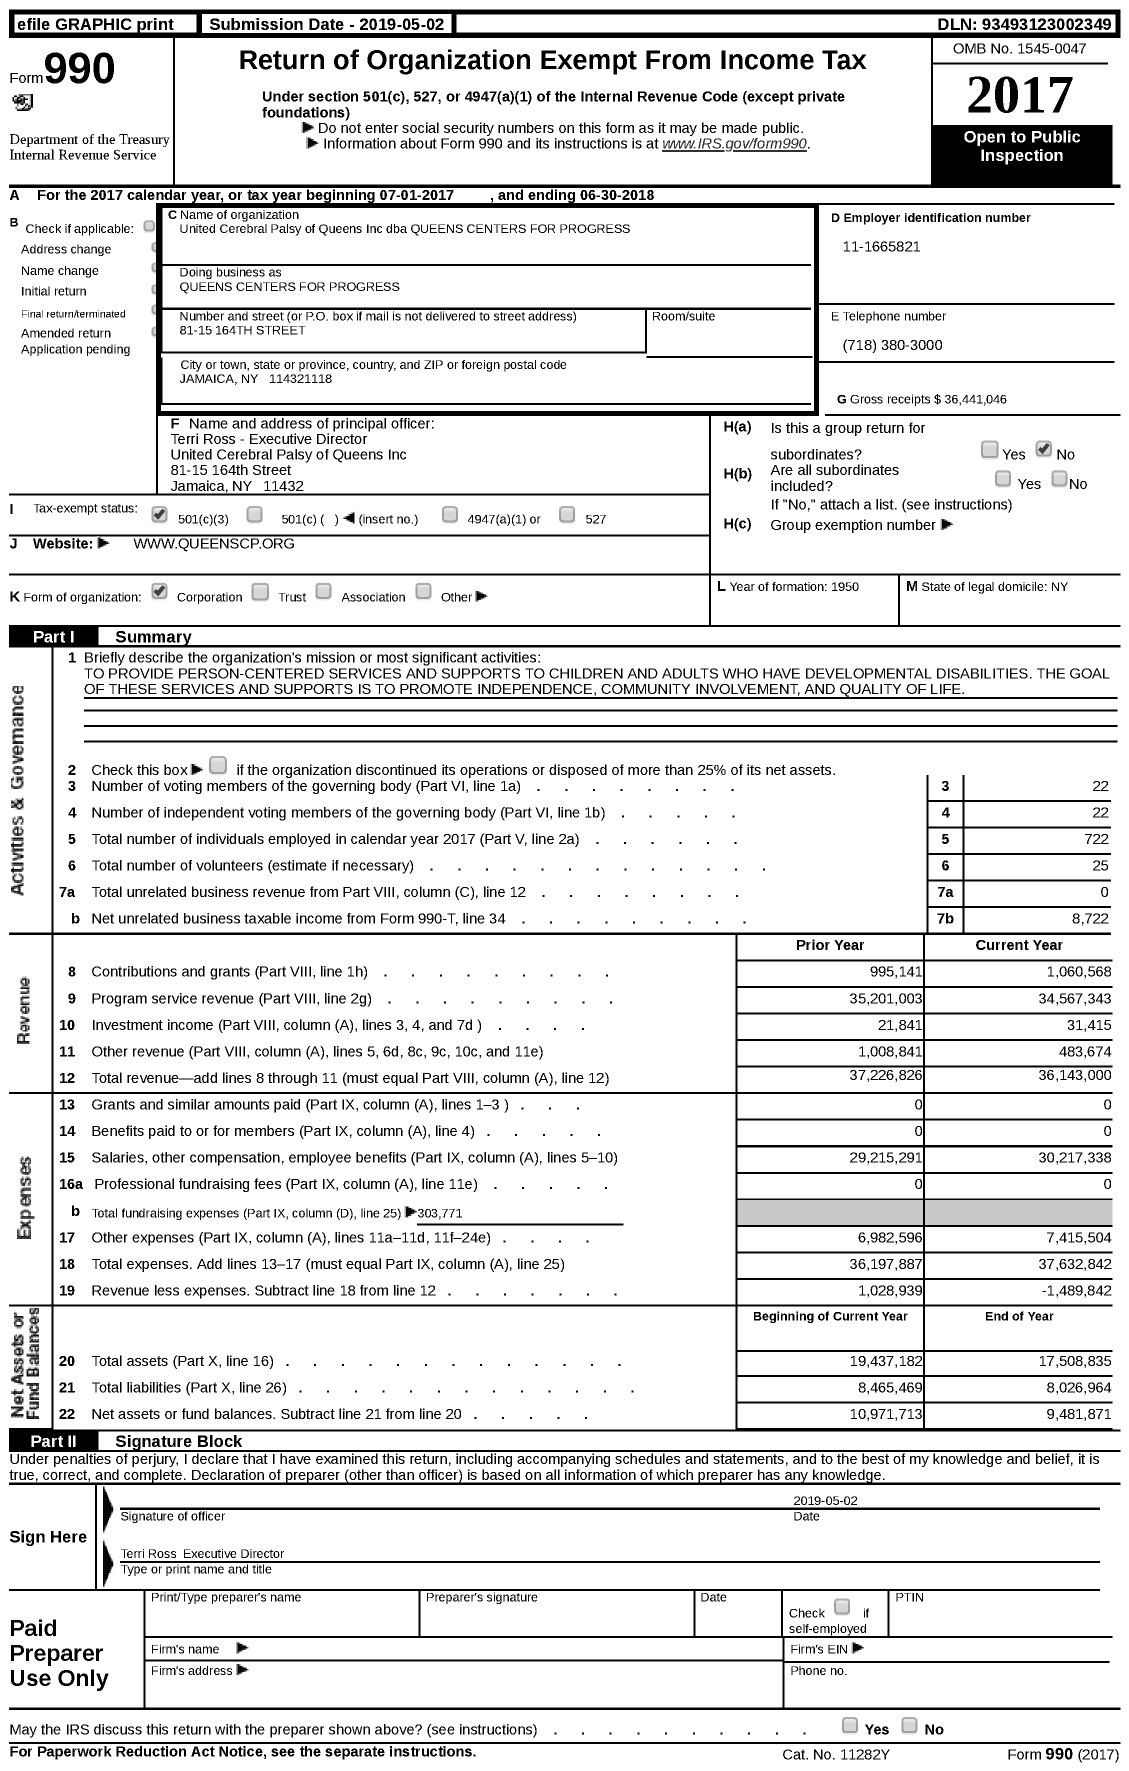 Image of first page of 2017 Form 990 for Queens Centers FOR PROGRESS (QCP)